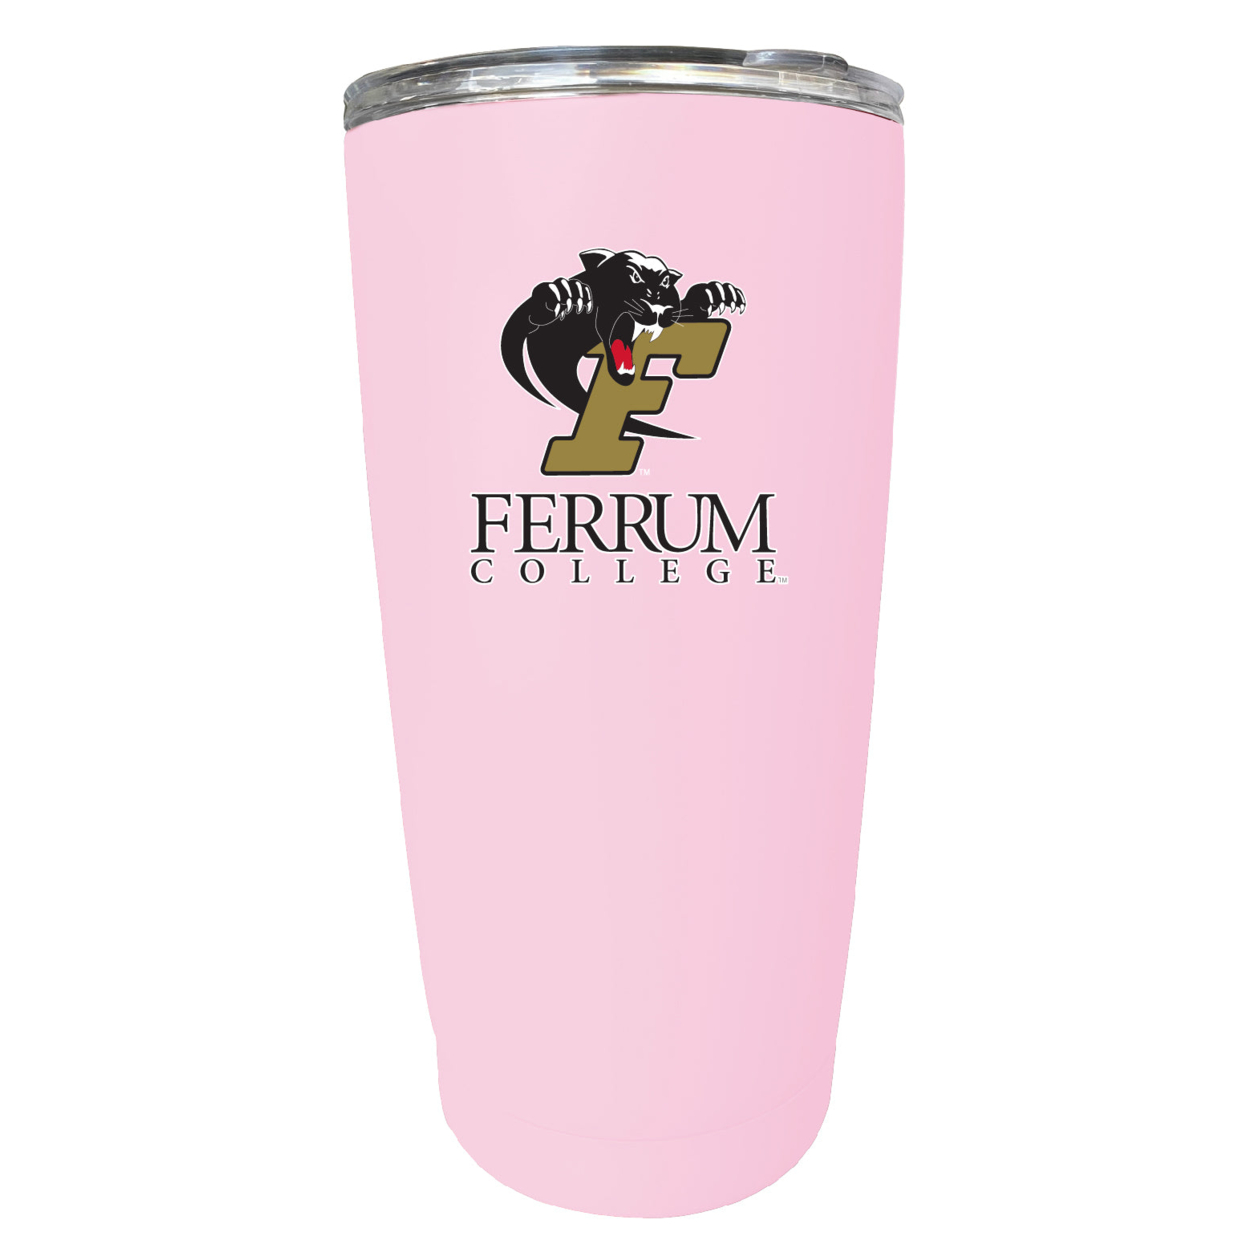 Ferrum College 16 Oz Stainless Steel Insulated Tumbler - Pink